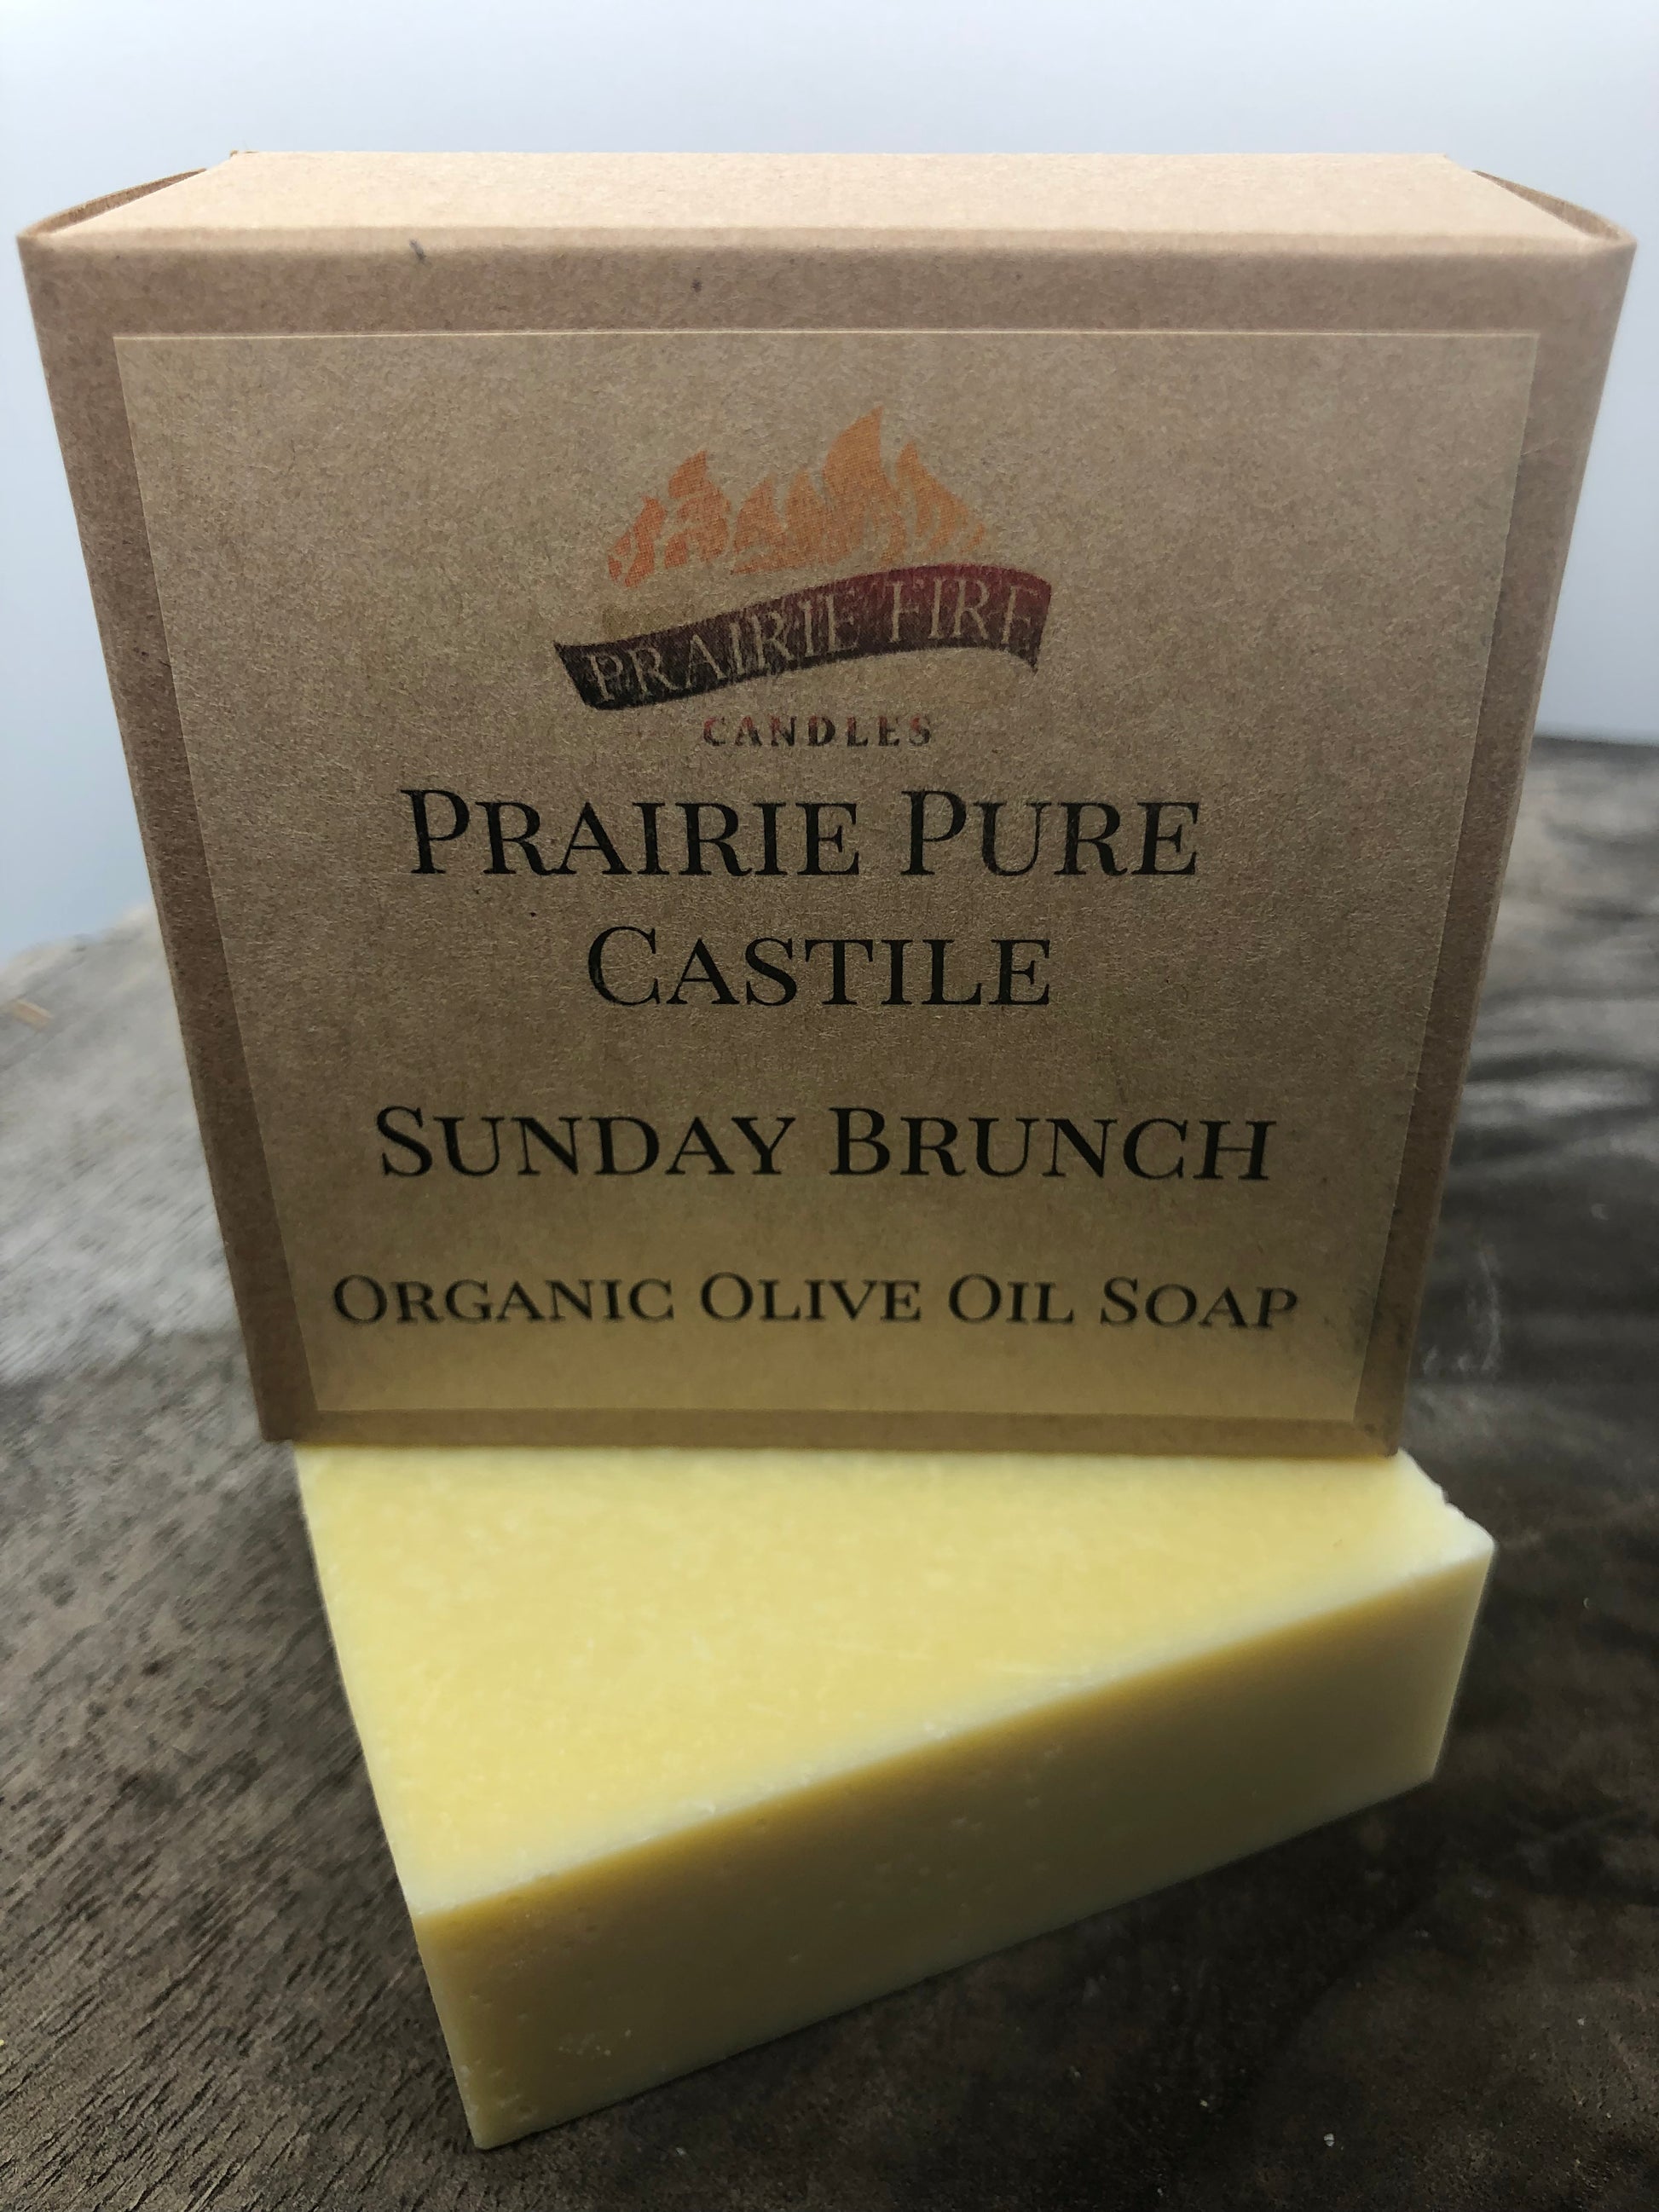 Sunday Brunch Real Castile Organic Olive Oil Soap for Sensitive Skin - Dye Free - 100% Certified Organic Extra Virgin Olive Oil - Prairie Fire Candles